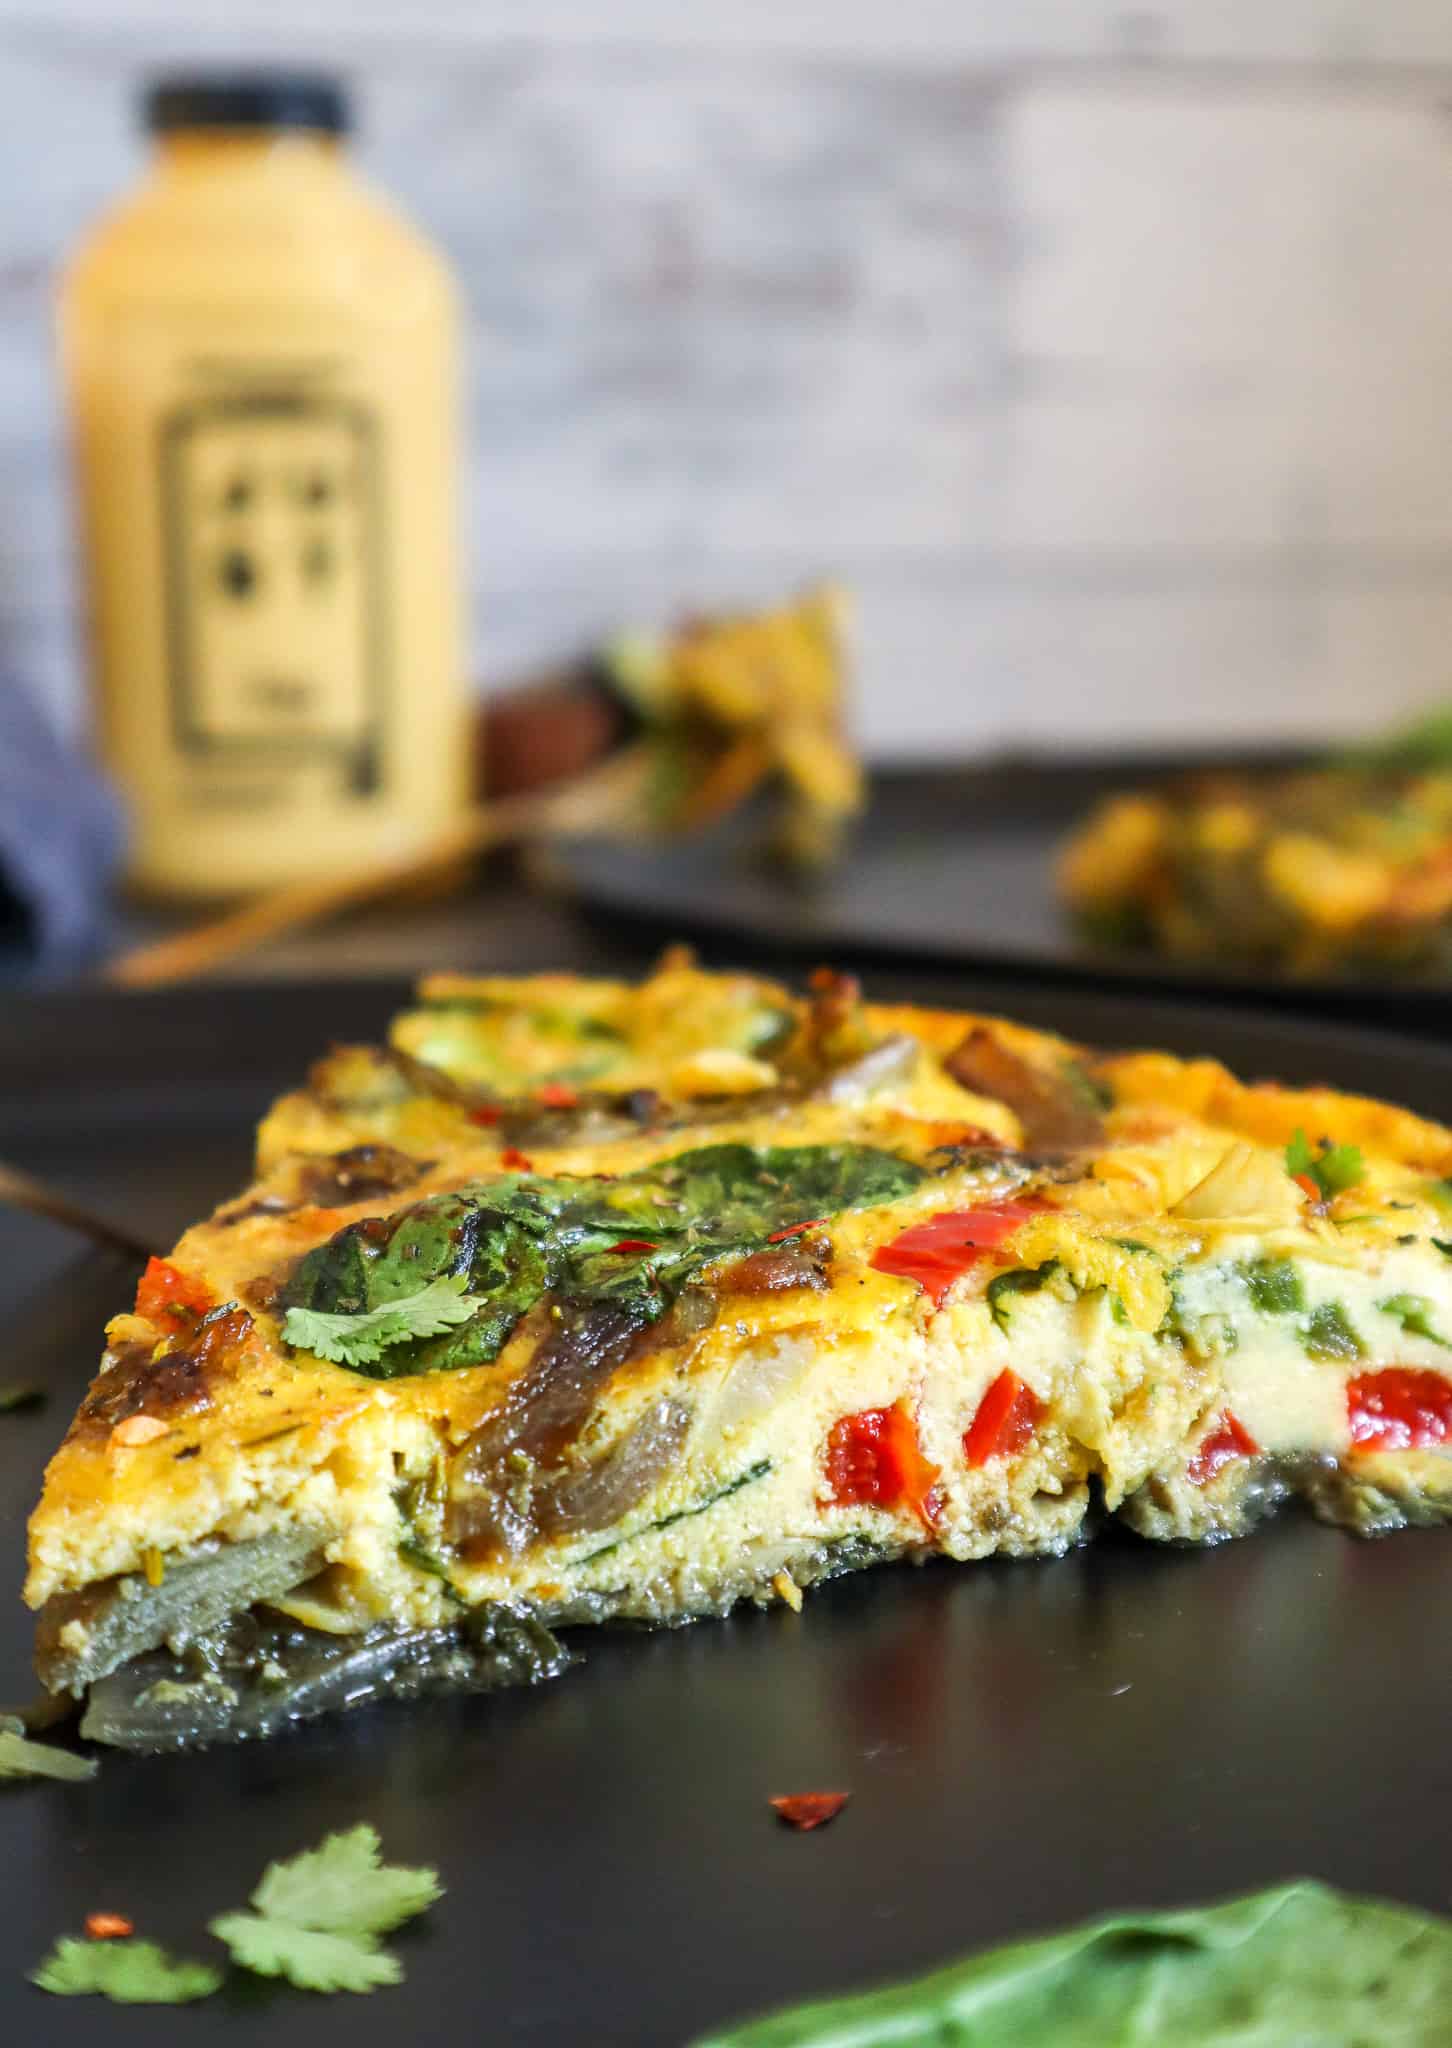 Slice of vegan frittata on a plate with a bottle of Just Egg in the background.